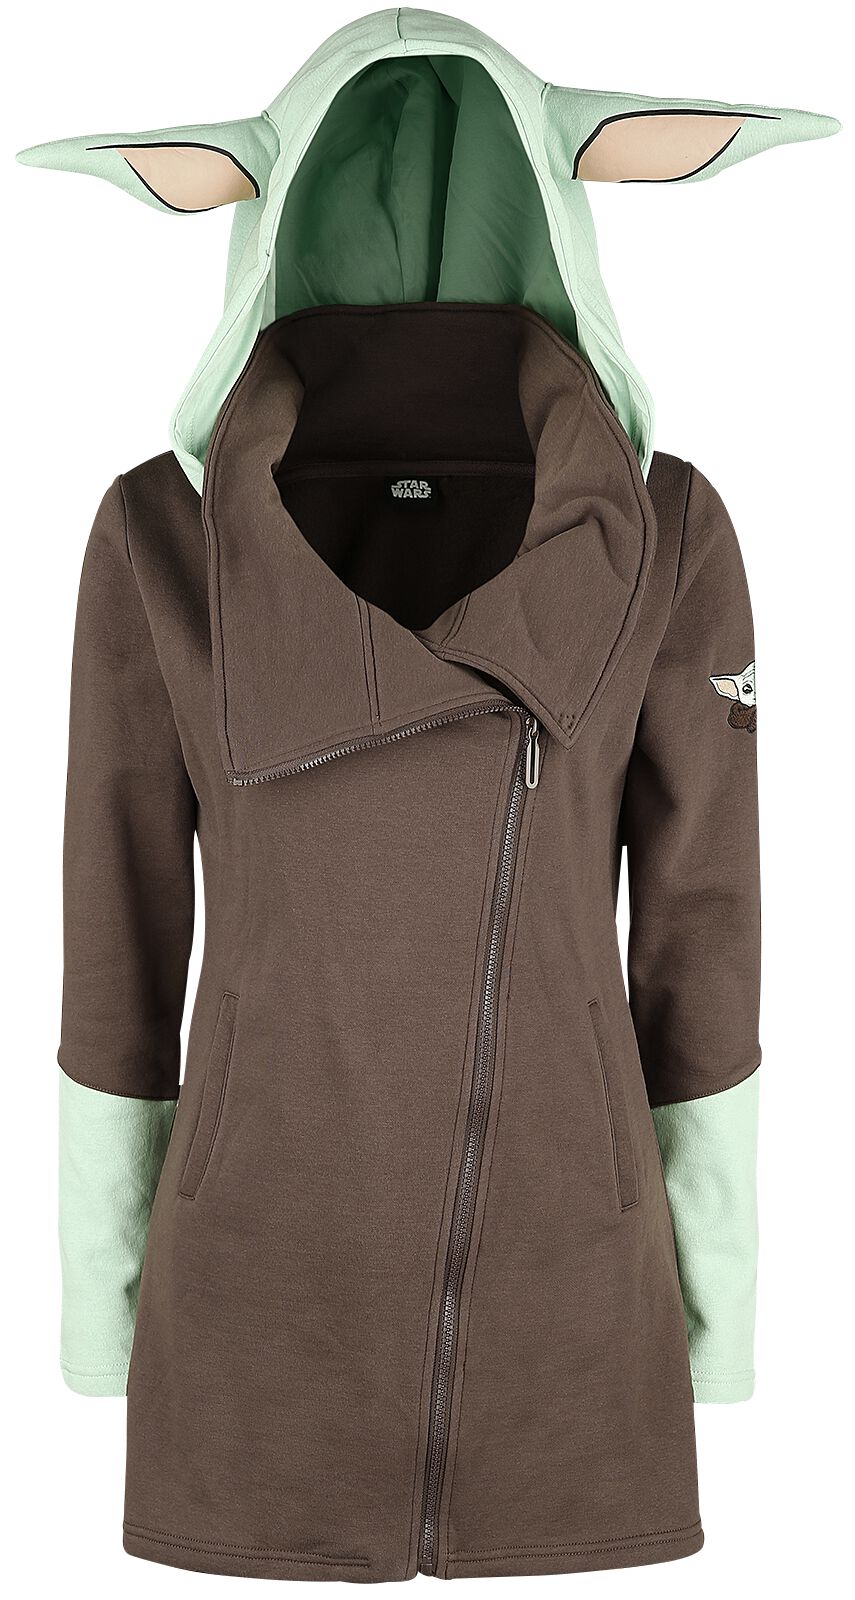 Star Wars The Mandalorian - The Child Hooded zip brown green